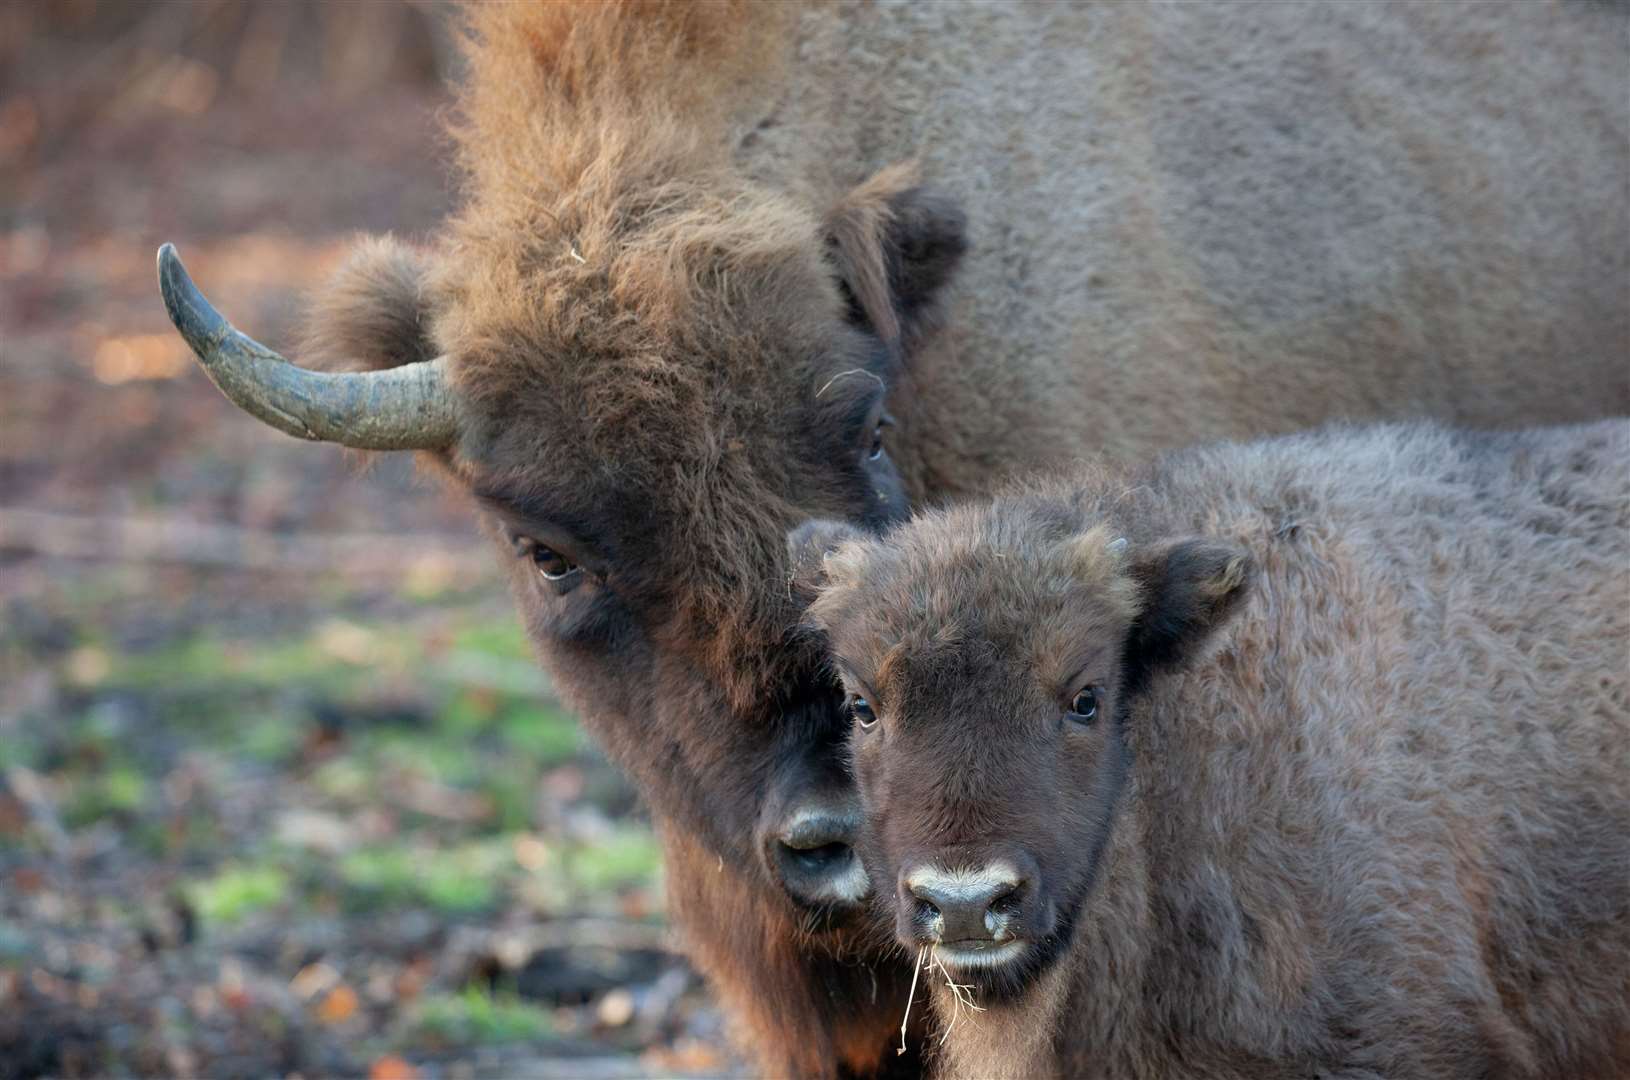 A bison calf was discovered in the herd at Blean in September last year